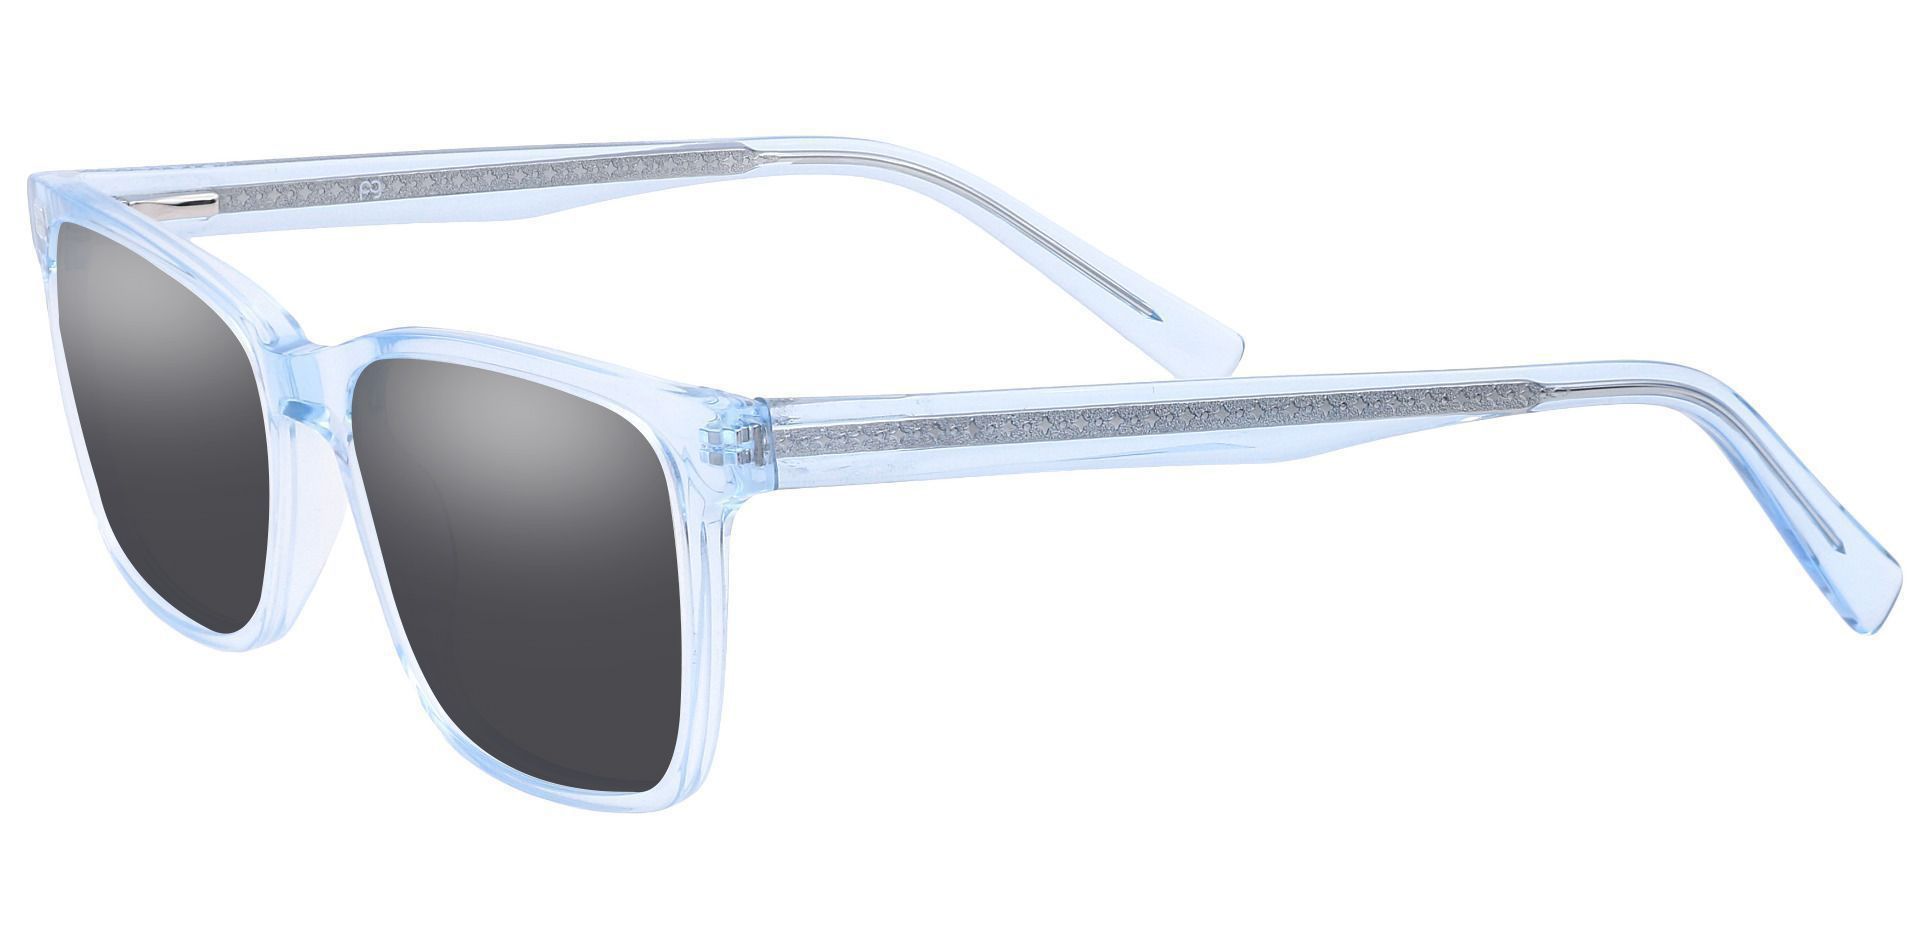 Galaxy Rectangle Non-Rx Sunglasses - Blue Frame With Gray Lenses